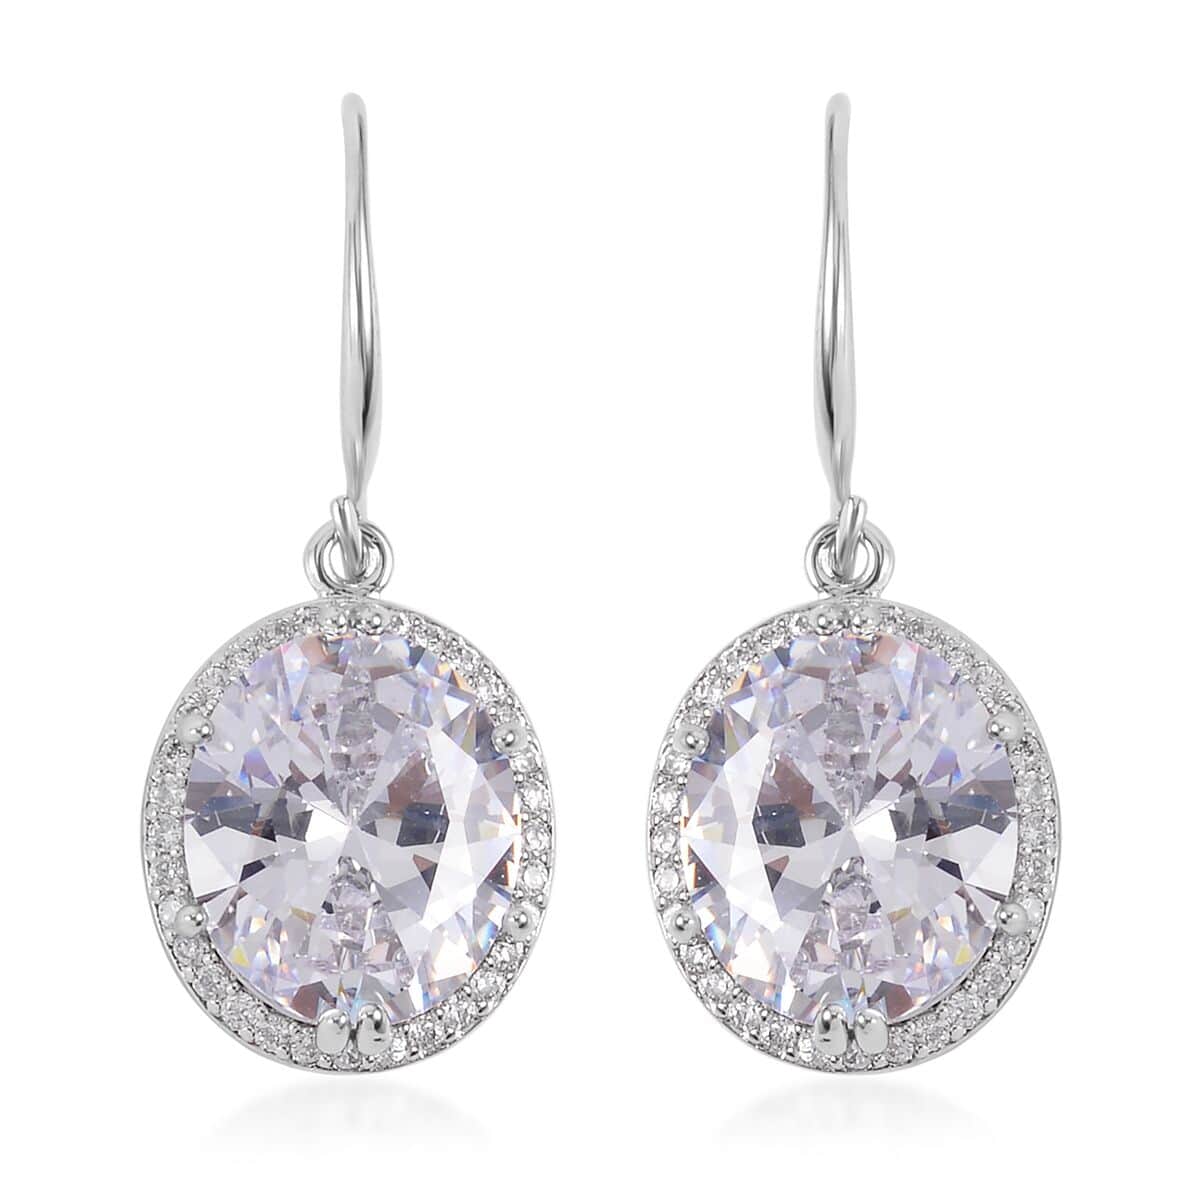 Simulated White Diamond Earrings, Halo Ring (Size 6.0) and Pendant Necklace in Silvertone 20-22 Inches image number 7